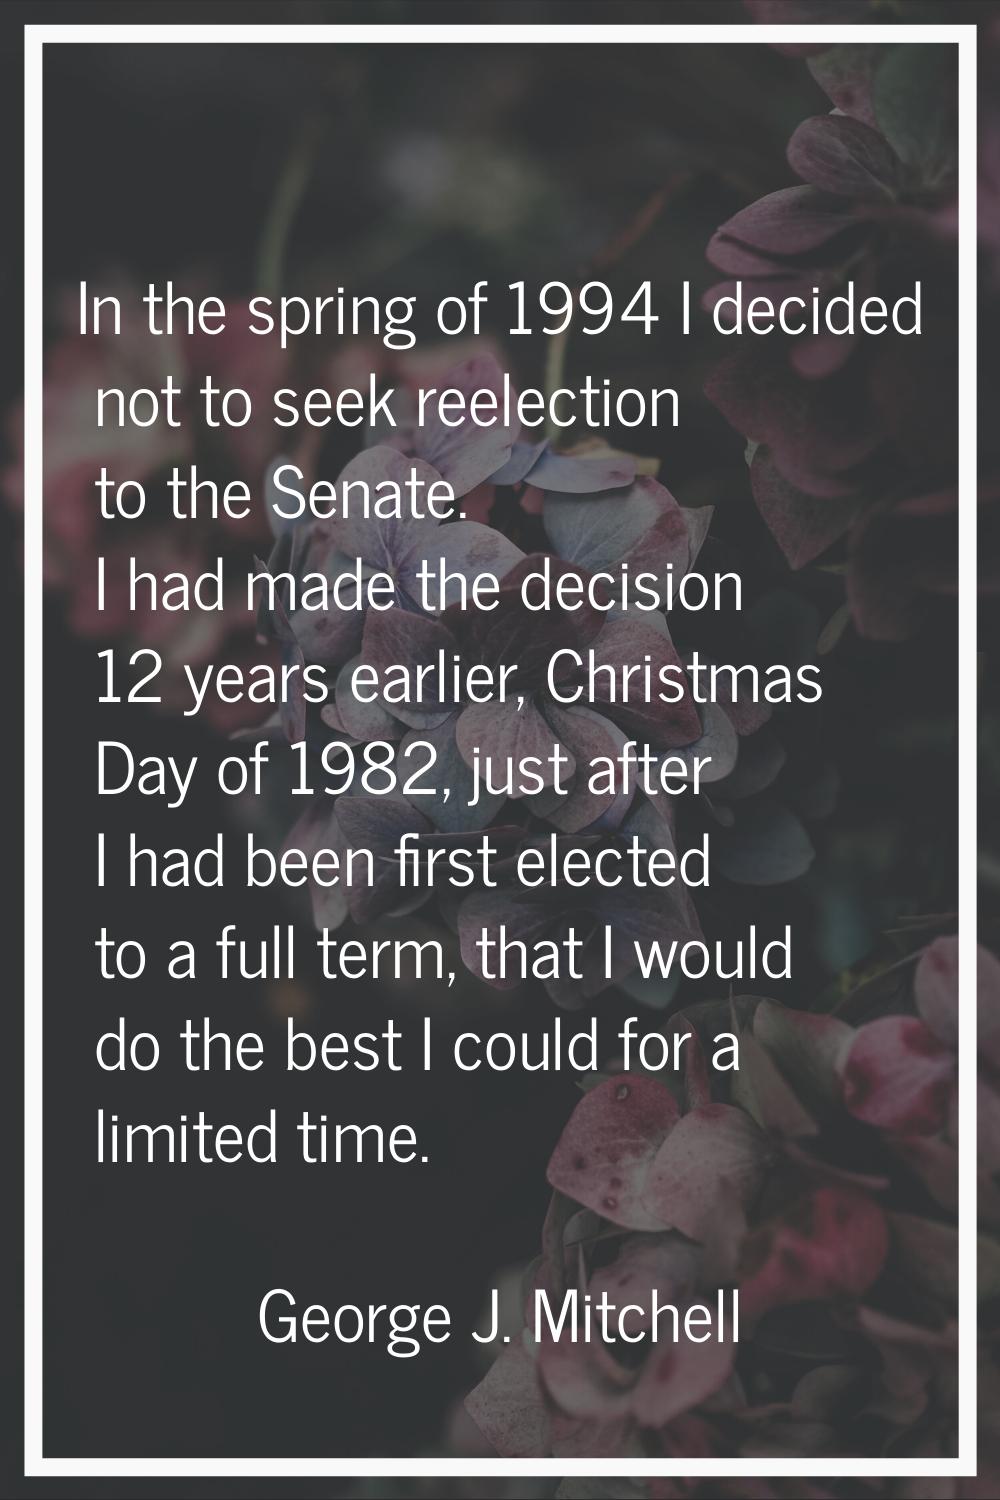 In the spring of 1994 I decided not to seek reelection to the Senate. I had made the decision 12 ye